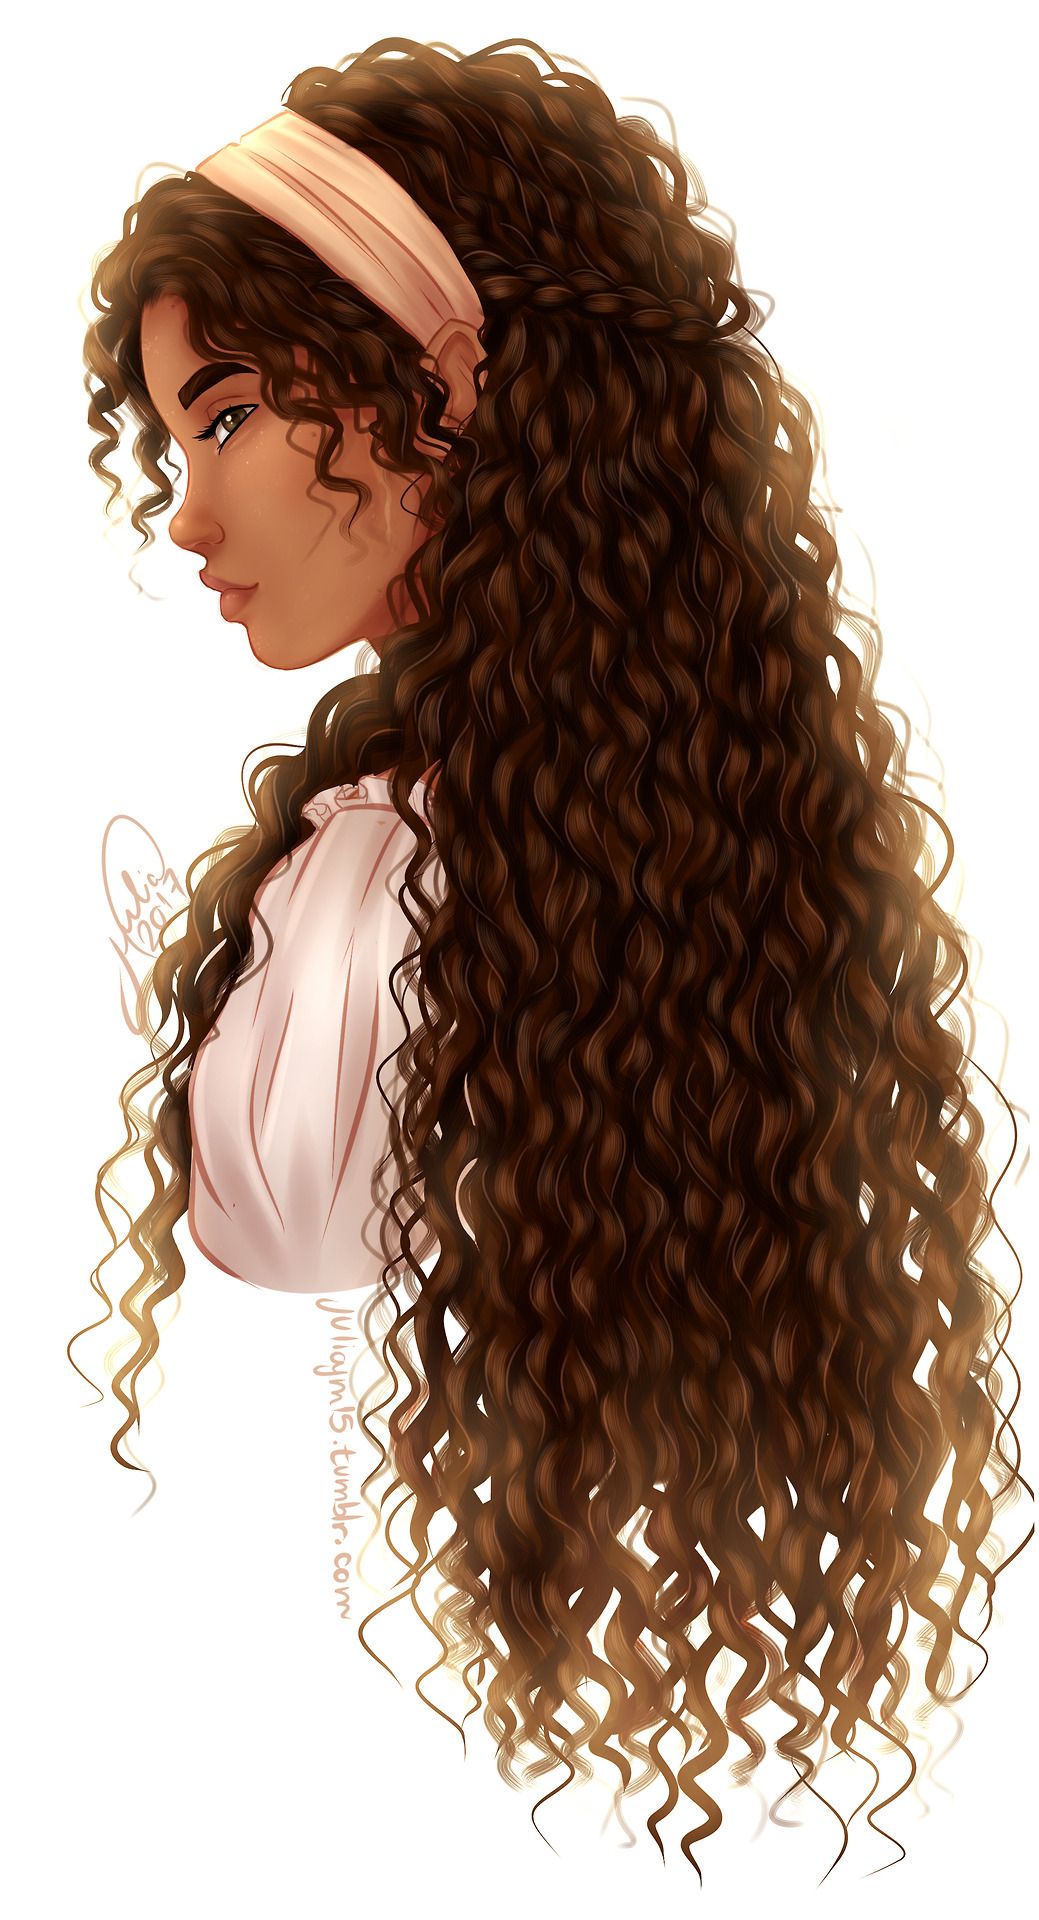 Anime Girls With Brown Curly Wavy Hair Wallpapers Wal - vrogue.co